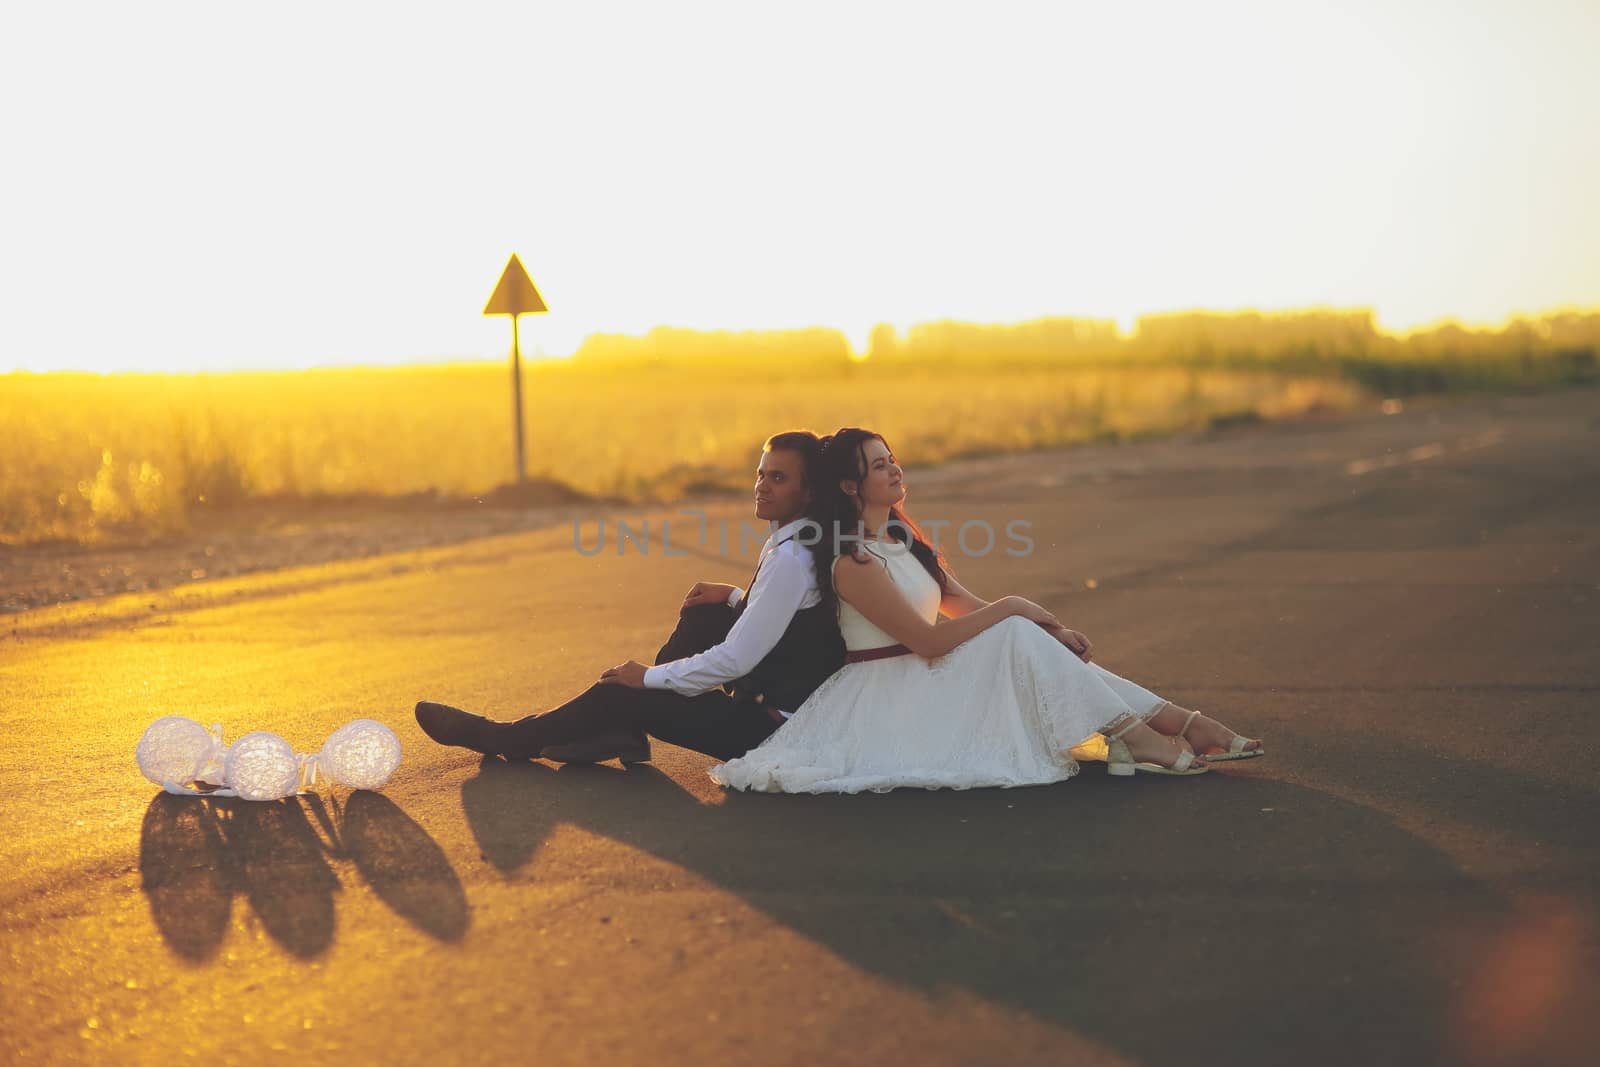 The bride and groom sit with their backs to each other in the sunset light. wedding. Happy love concept. by selinsmo